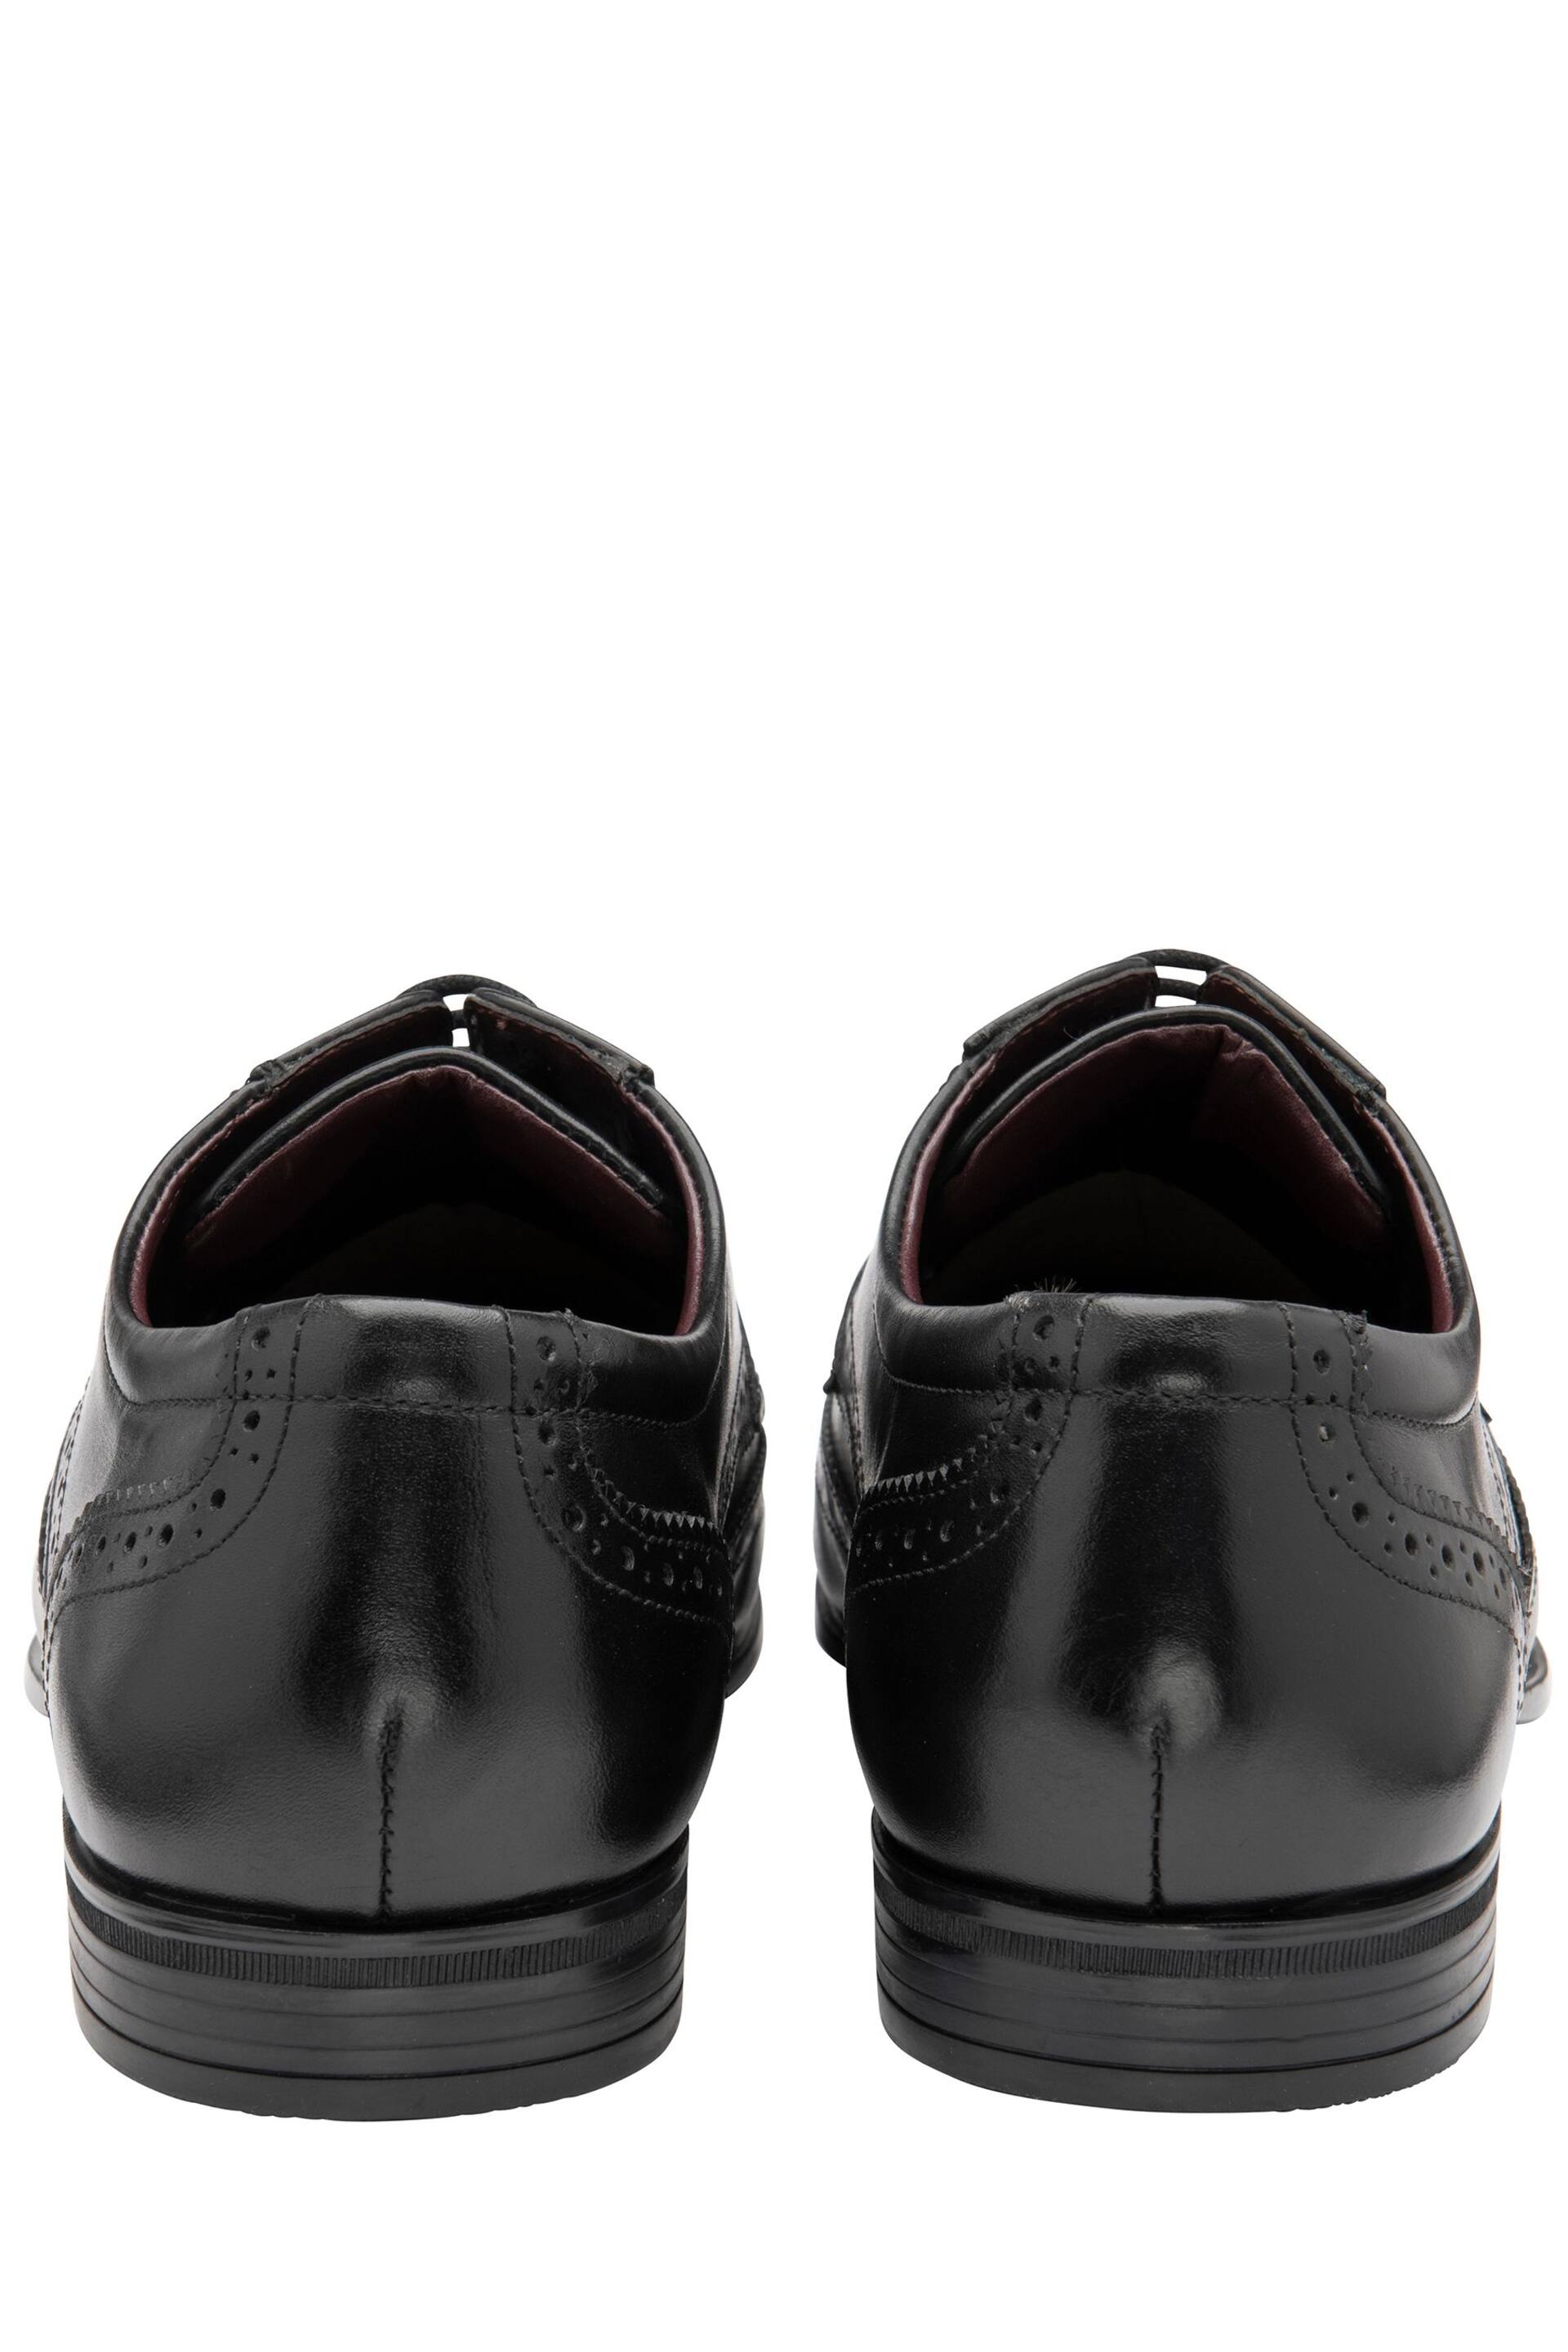 Lotus Jet Black Leather Lace-Up Brogues - Image 3 of 4